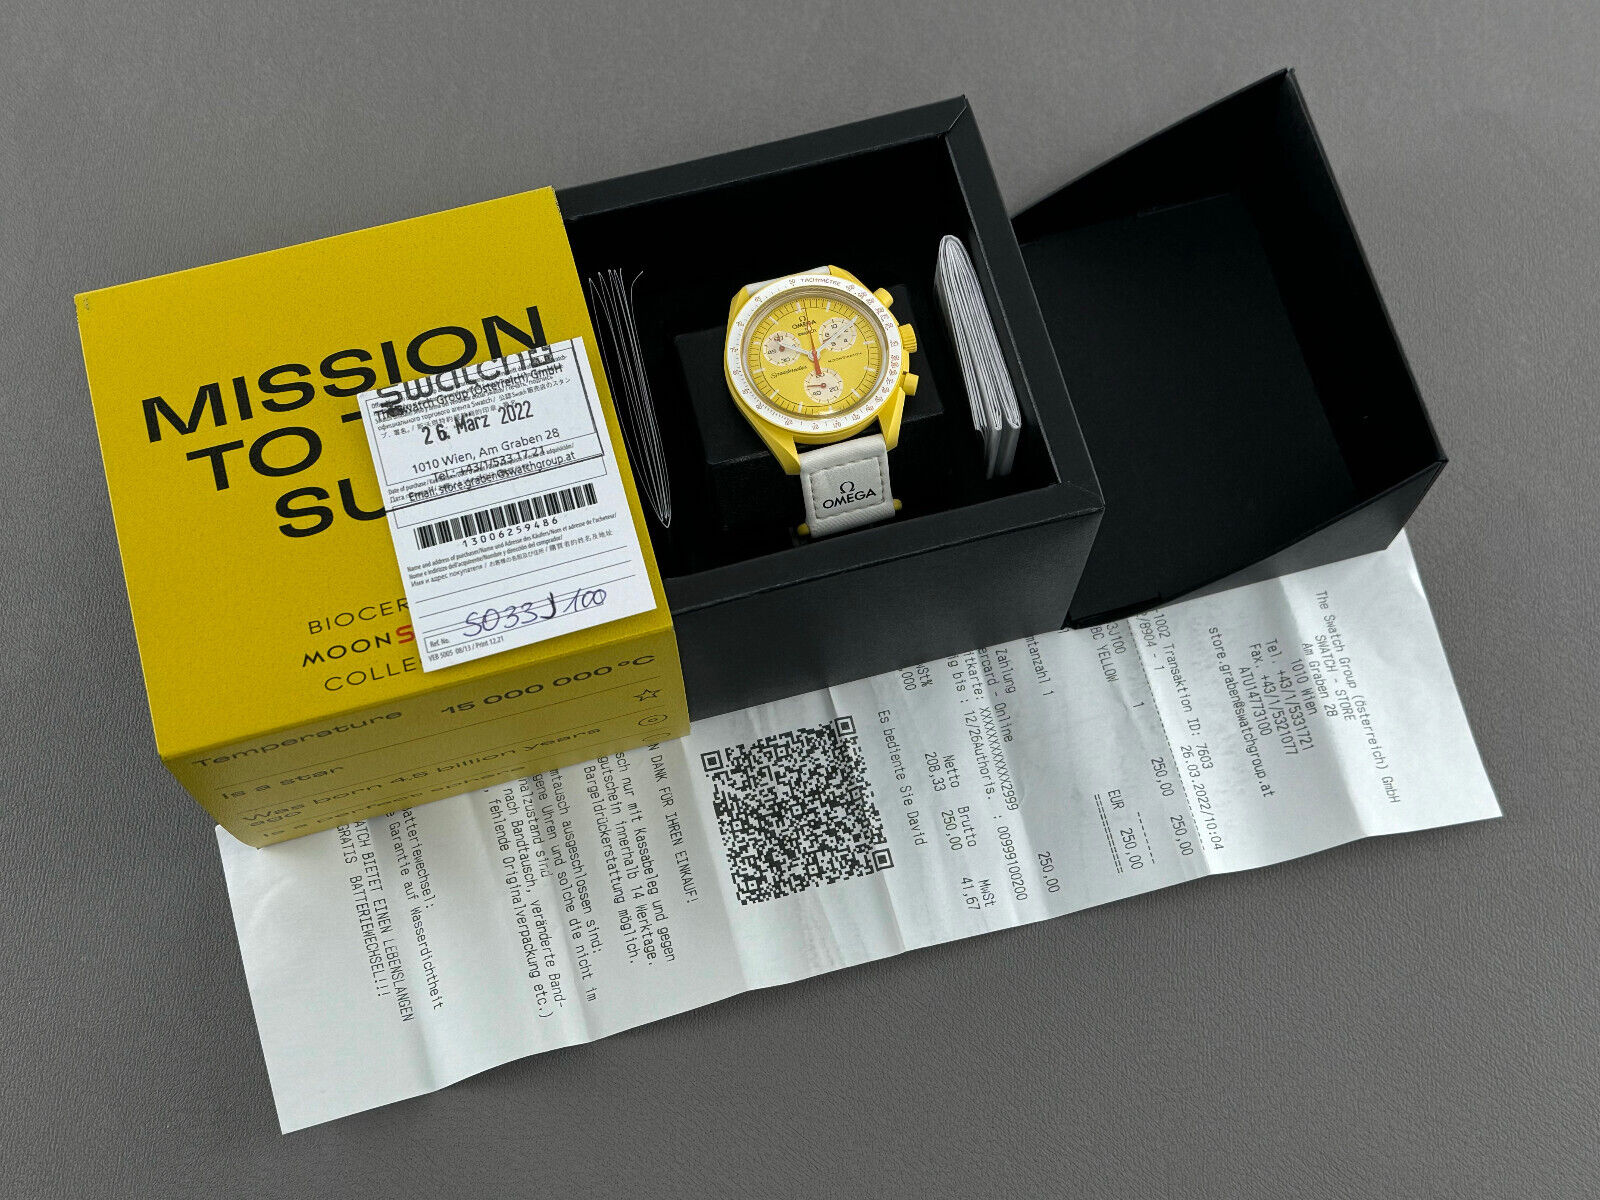 Omega x Swatch MoonSwatch Mission to the Sun SO33J100